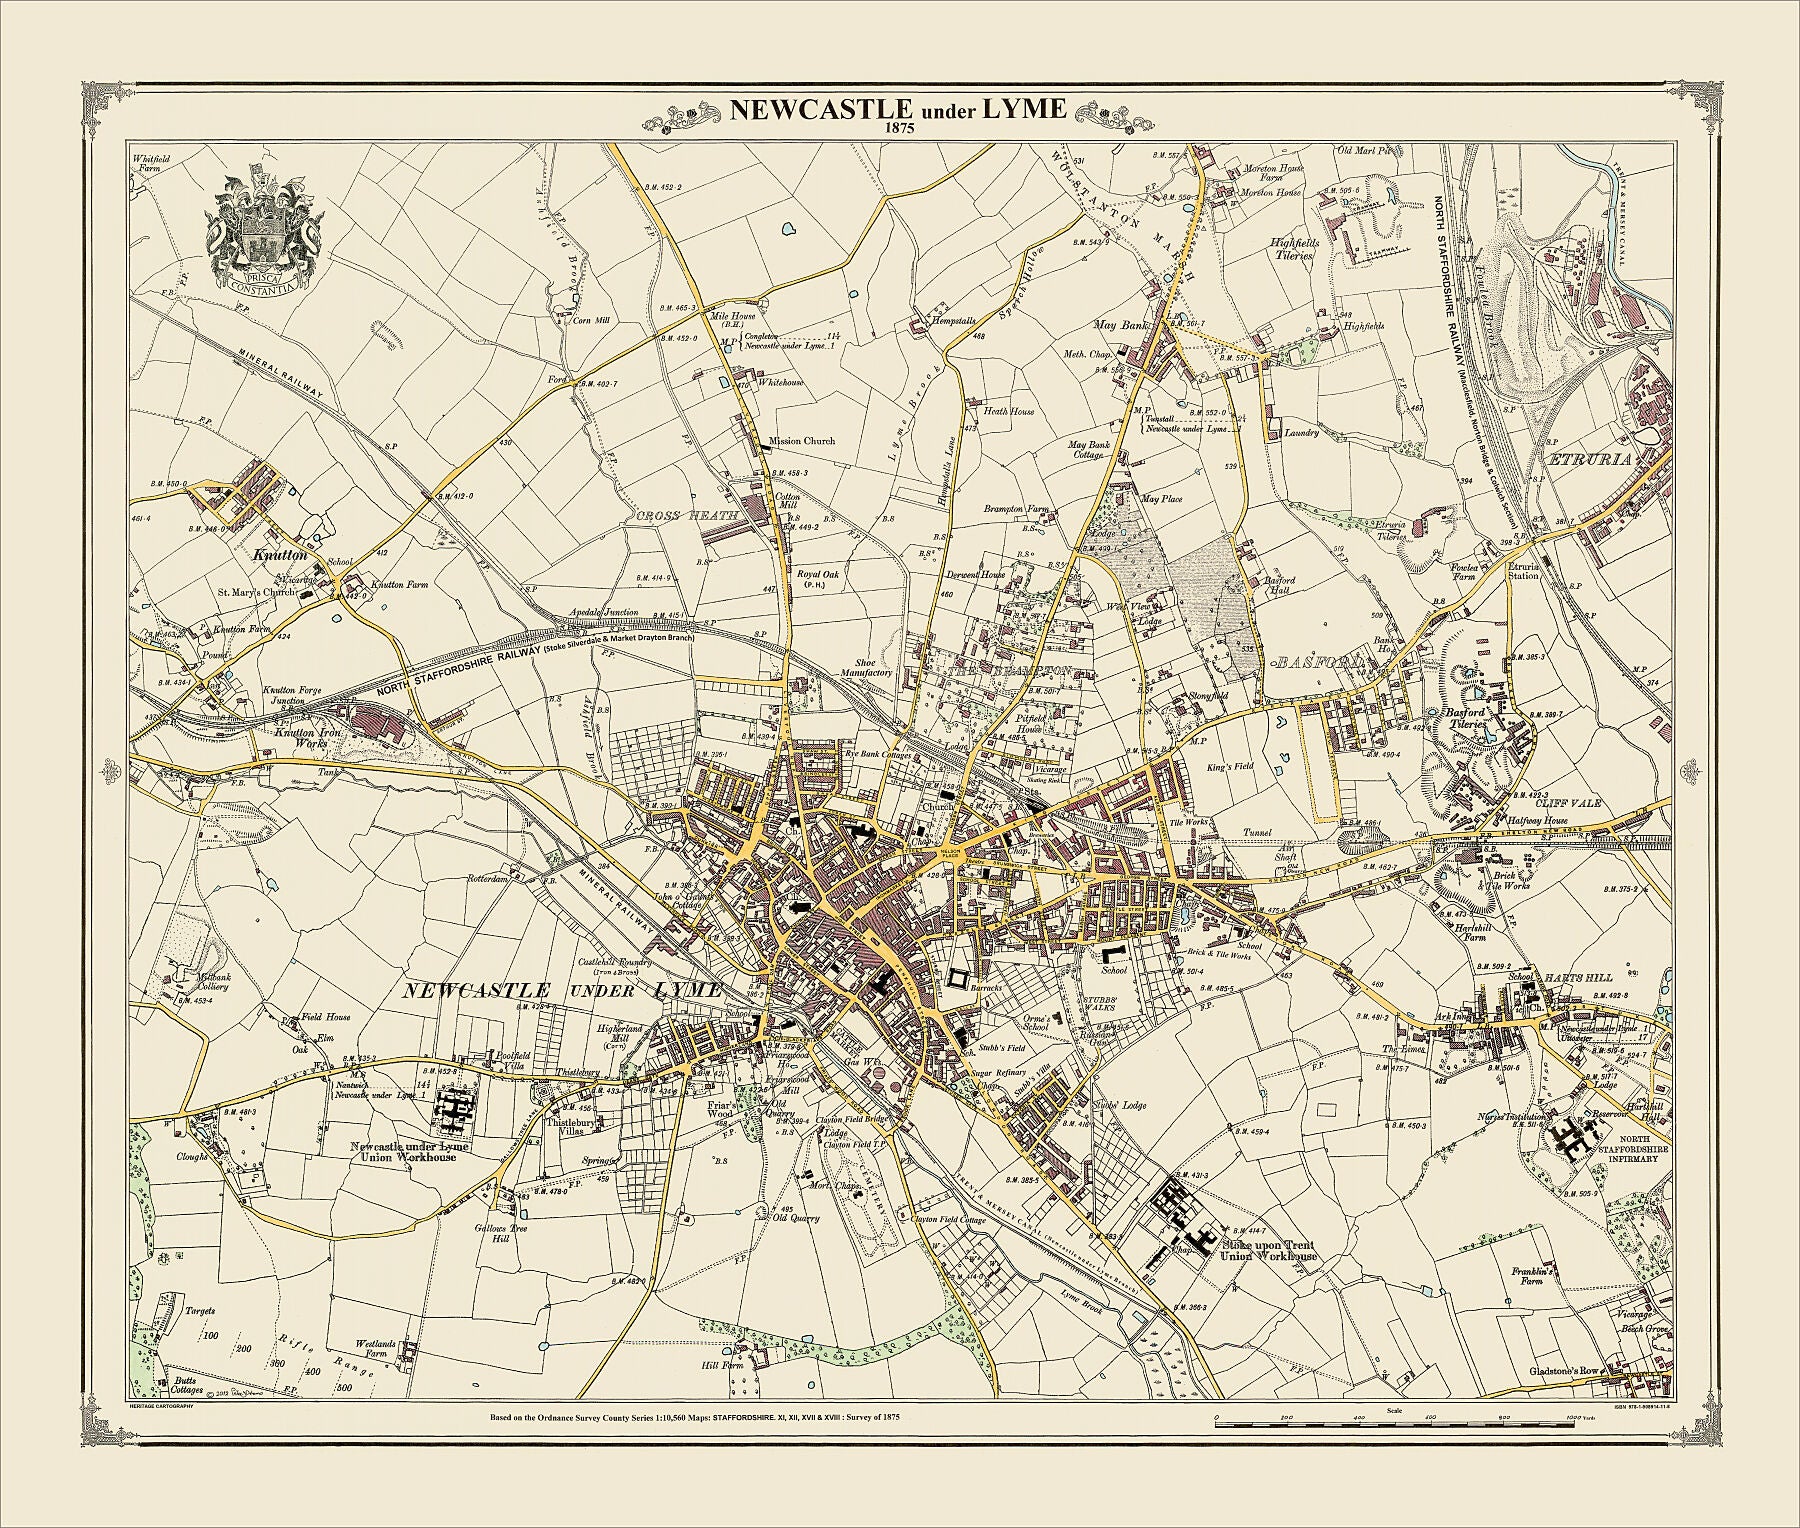 Coloured Victorian map of Newcastle-under-Lyme in 1875 by Peter J Adams of Heritage Cartography